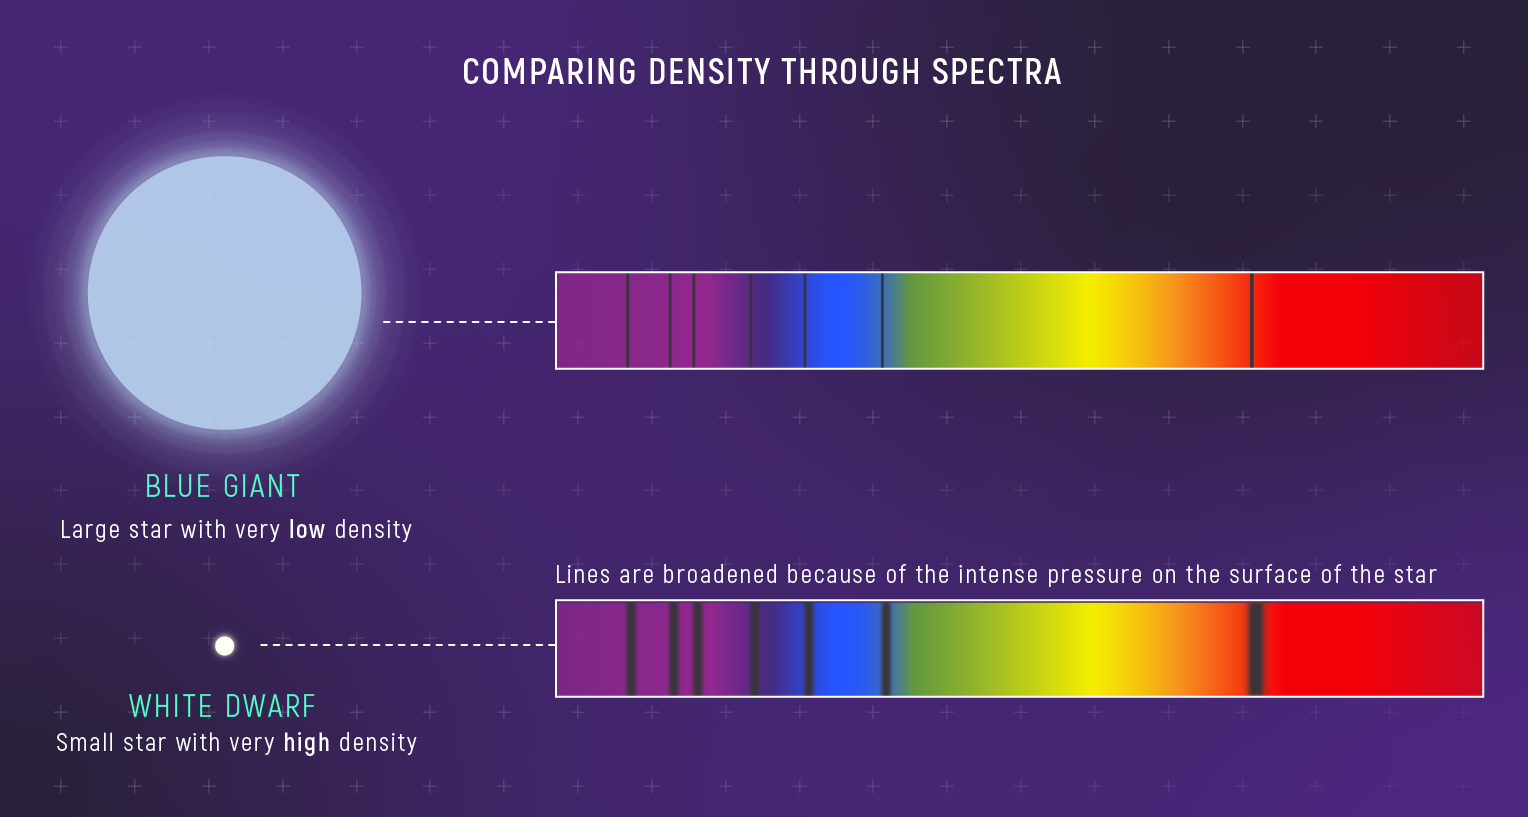 Against a purple background, drawings of a large blue giant star and a small white dwarf are viewed to the left of two rainbow-colored rows representing their spectra. White text along the top reads "Comparing Density Through Spectra."